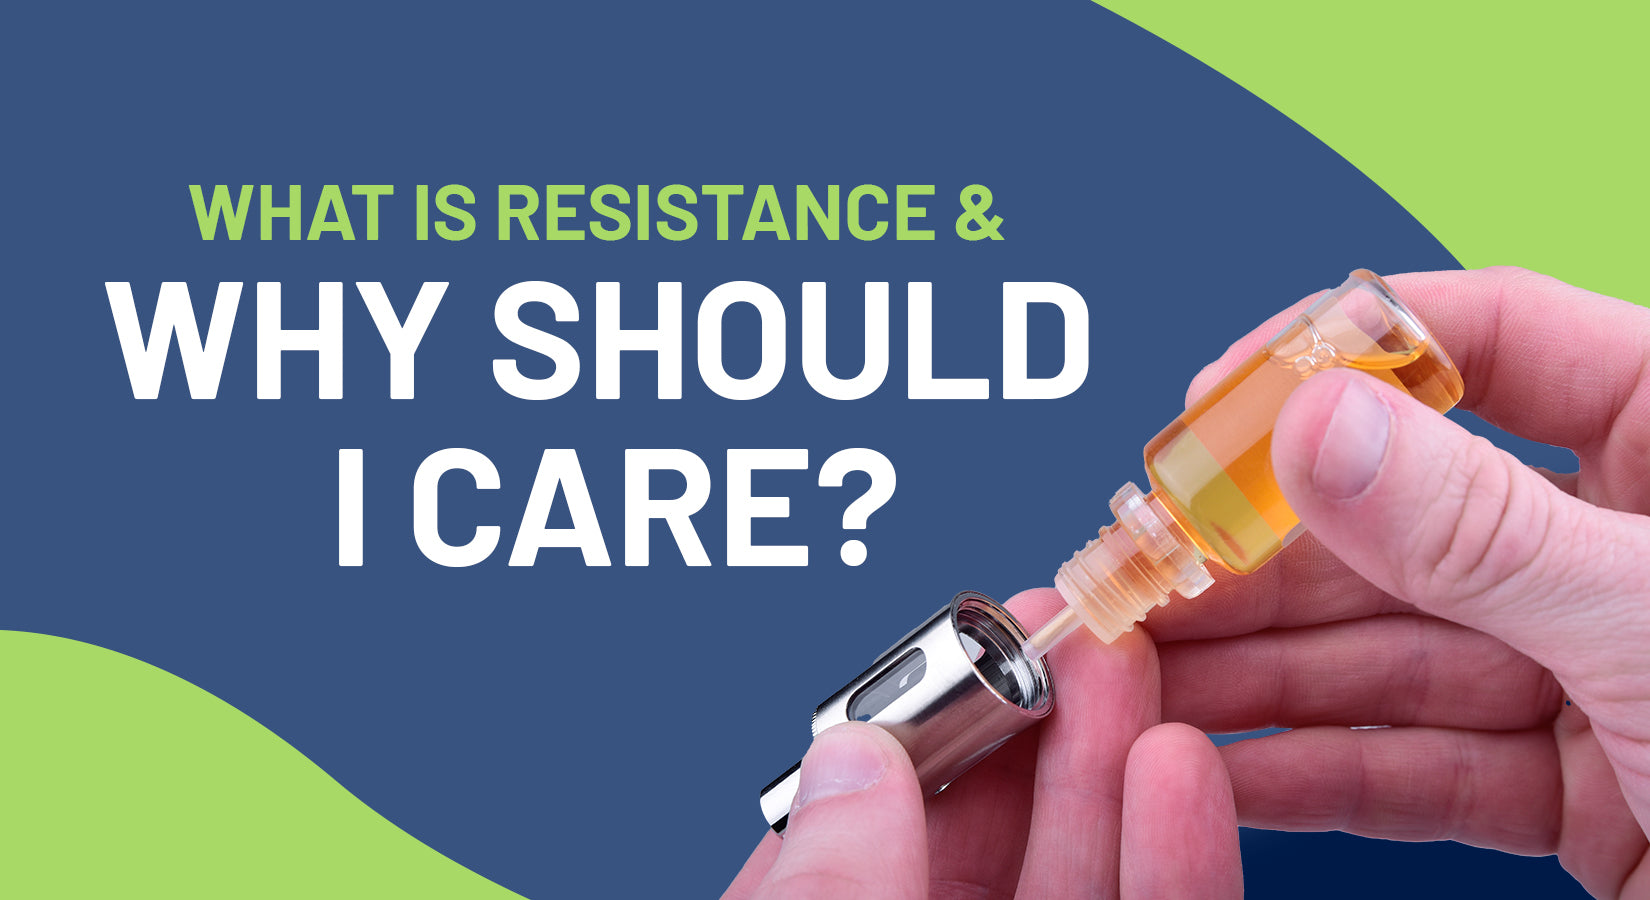 What Is Resistance & Why Should I Care?